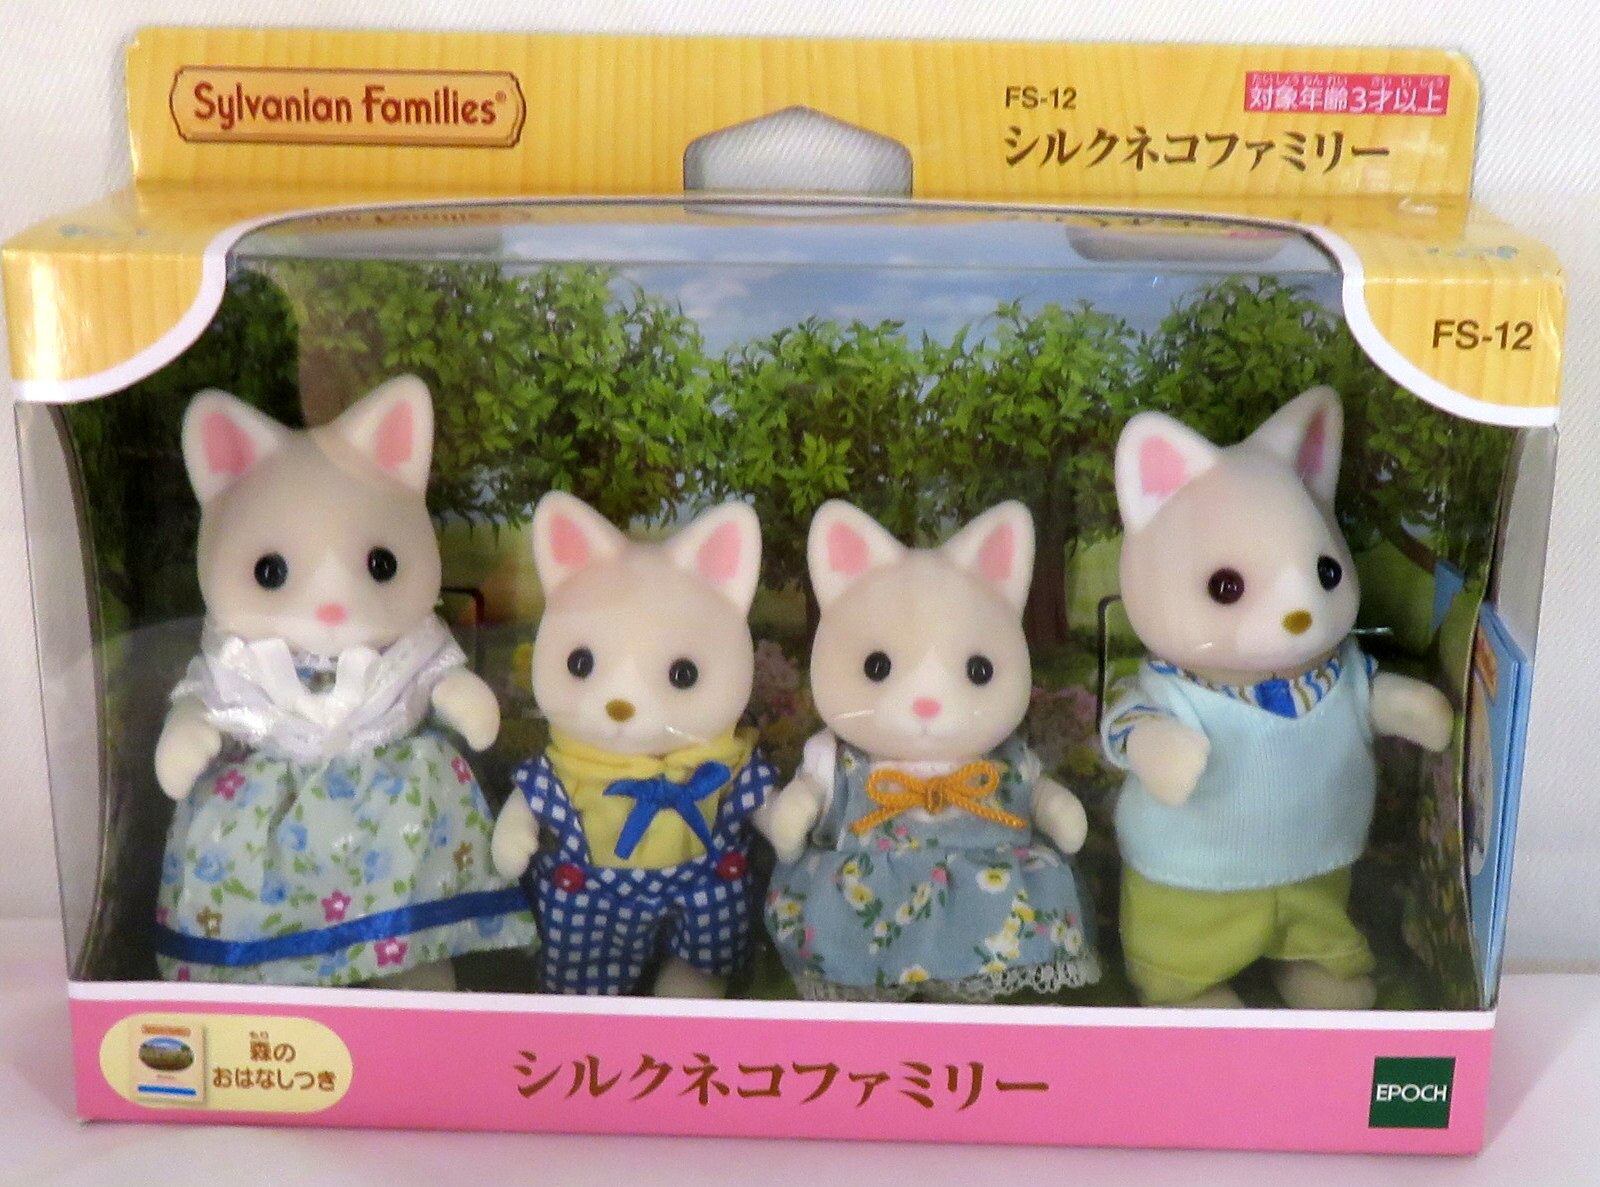 Calico Critters Family doll Silk cat family FS-12 Epoch 